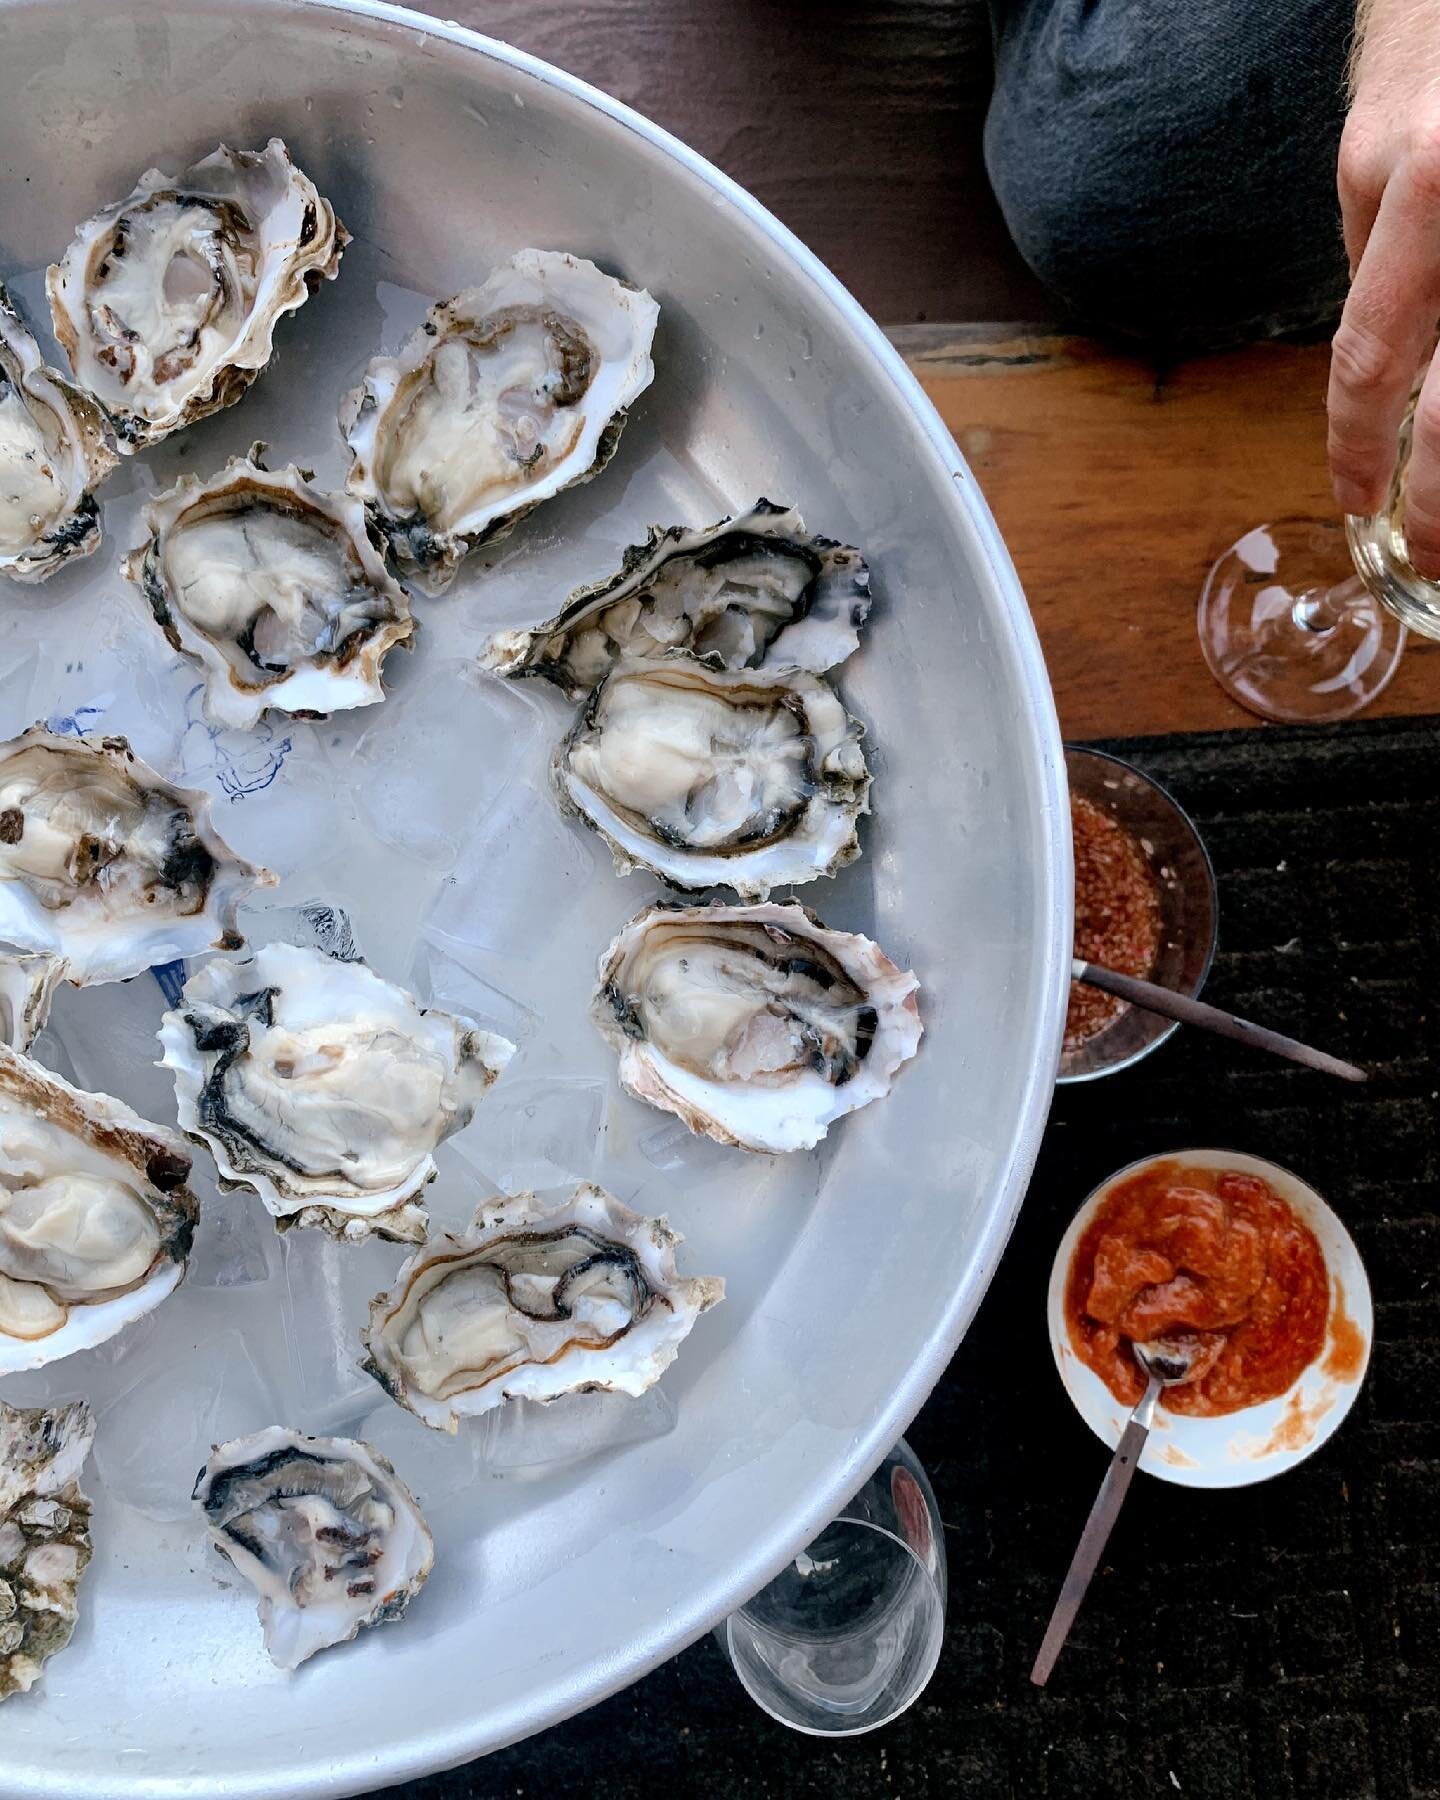 There&rsquo;s a lot to catch up on, but let&rsquo;s skip all that and have some oysters.

The oyster is a perfect symbol for discovery, danger, allure, and transformation of something difficult into something beautiful (the pearl). &hearts;️ After a 